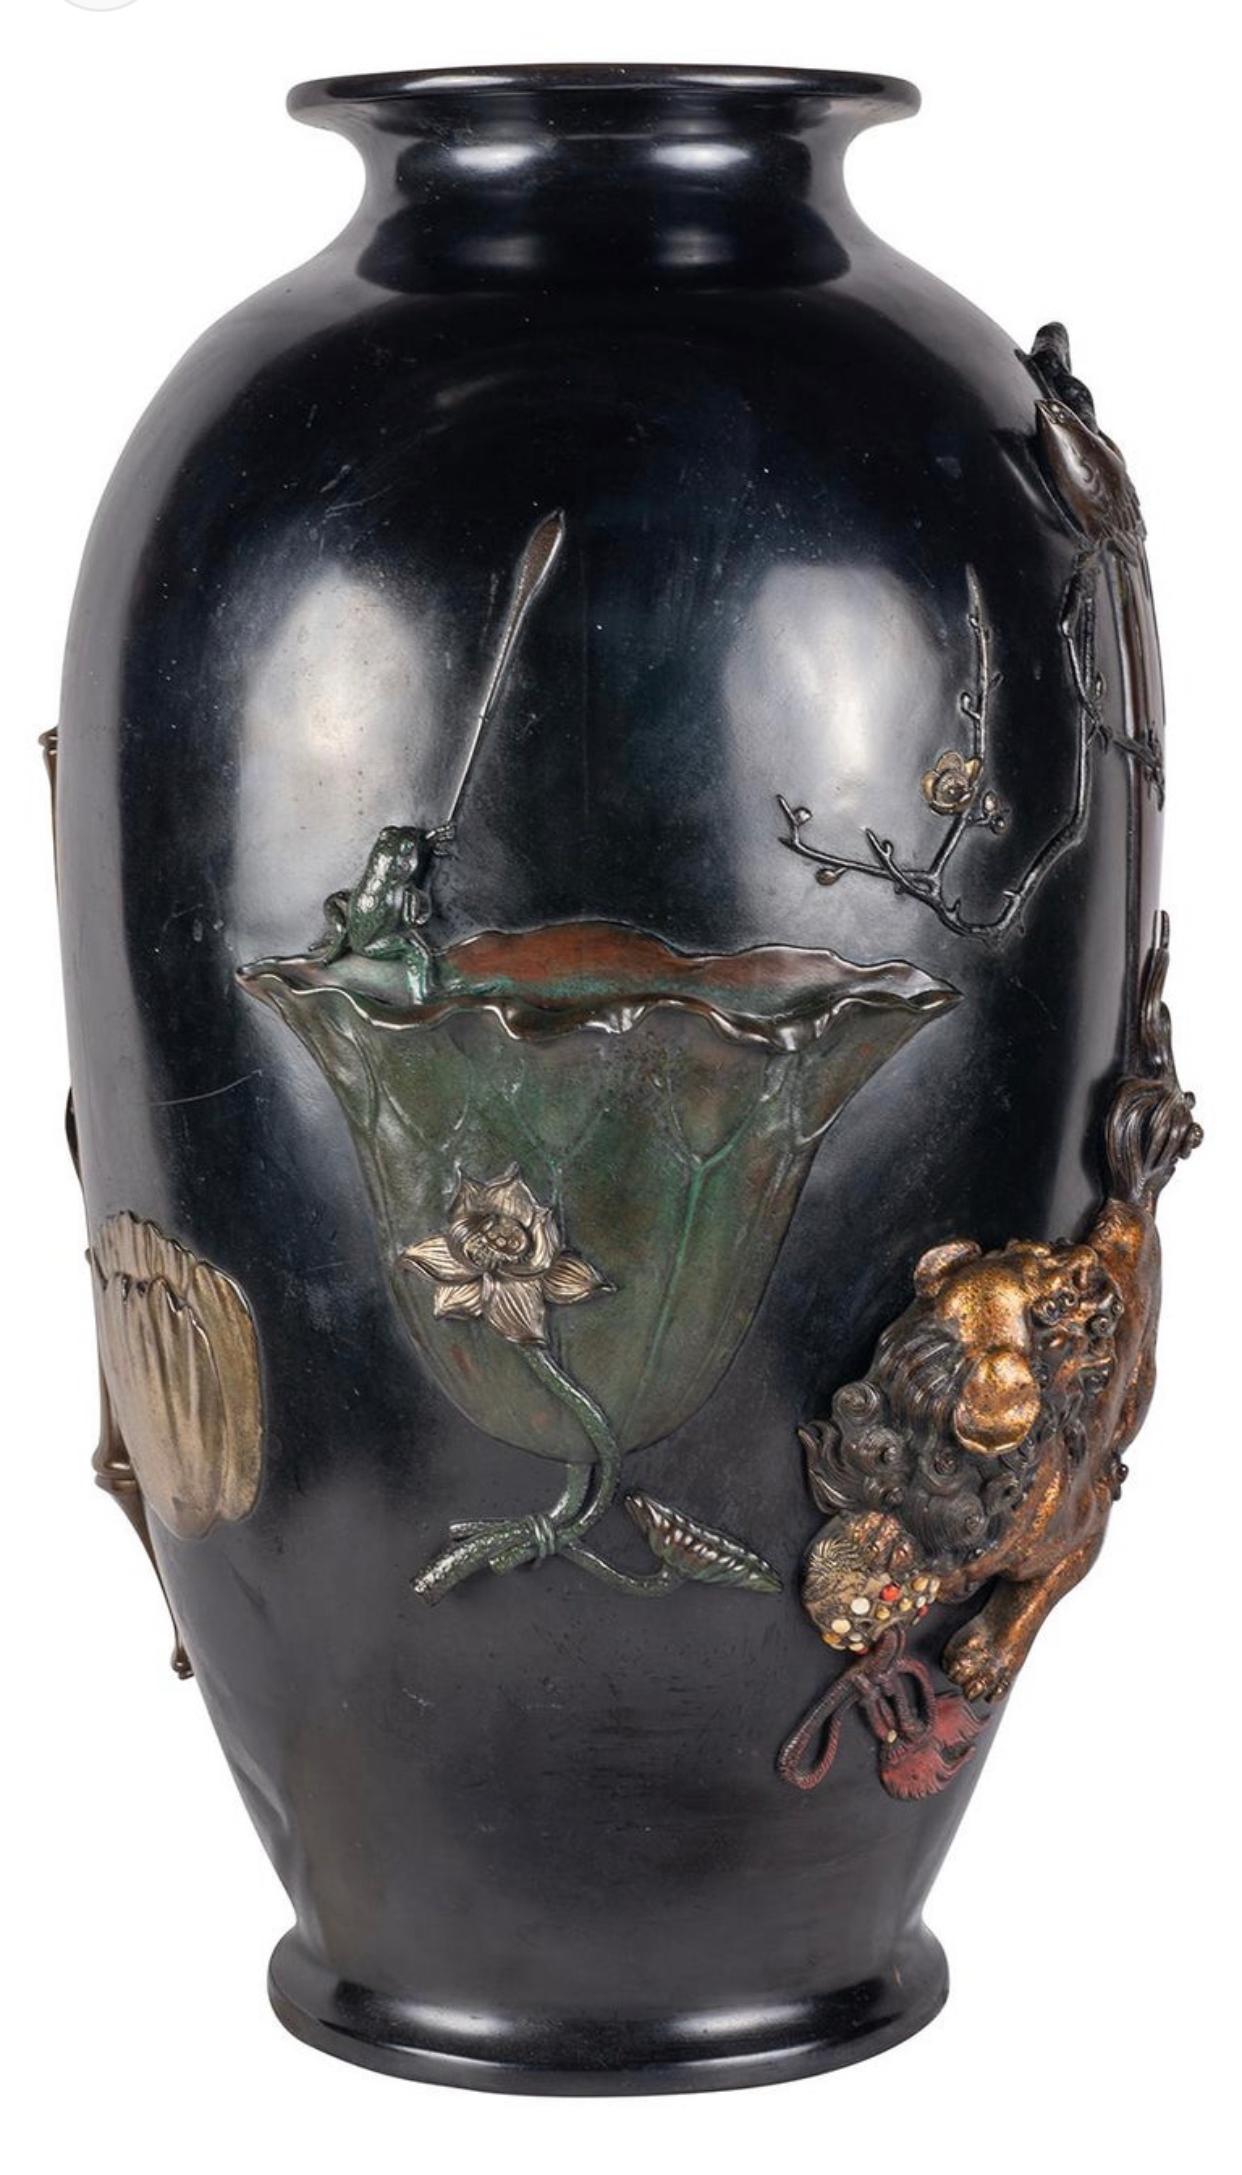 A wonderful Japanese Meiji period (1868-1912) Bronze overlay vase. Having exquisite and amusing scenes in relief, patinated and overlay of a Dog of Foo, a Frog fishing in a Lotus leaf cup, a Bamboo and bronze vase and jardiniere. a larger bronze